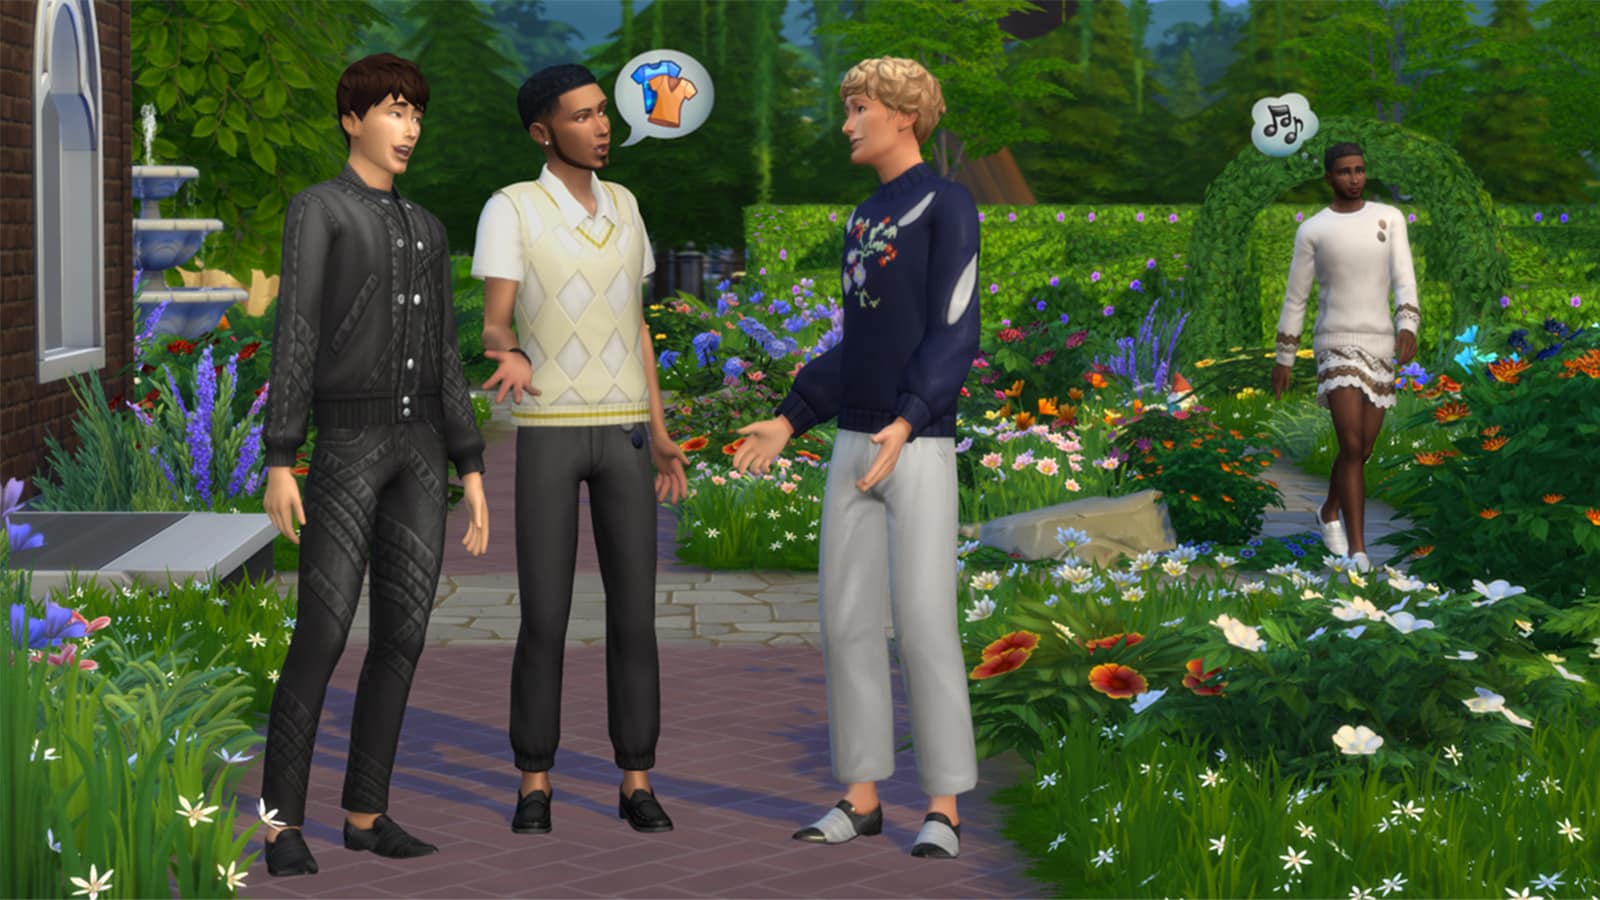 Non-binary characters in The Sims 4 wearing gender-neutral clothing